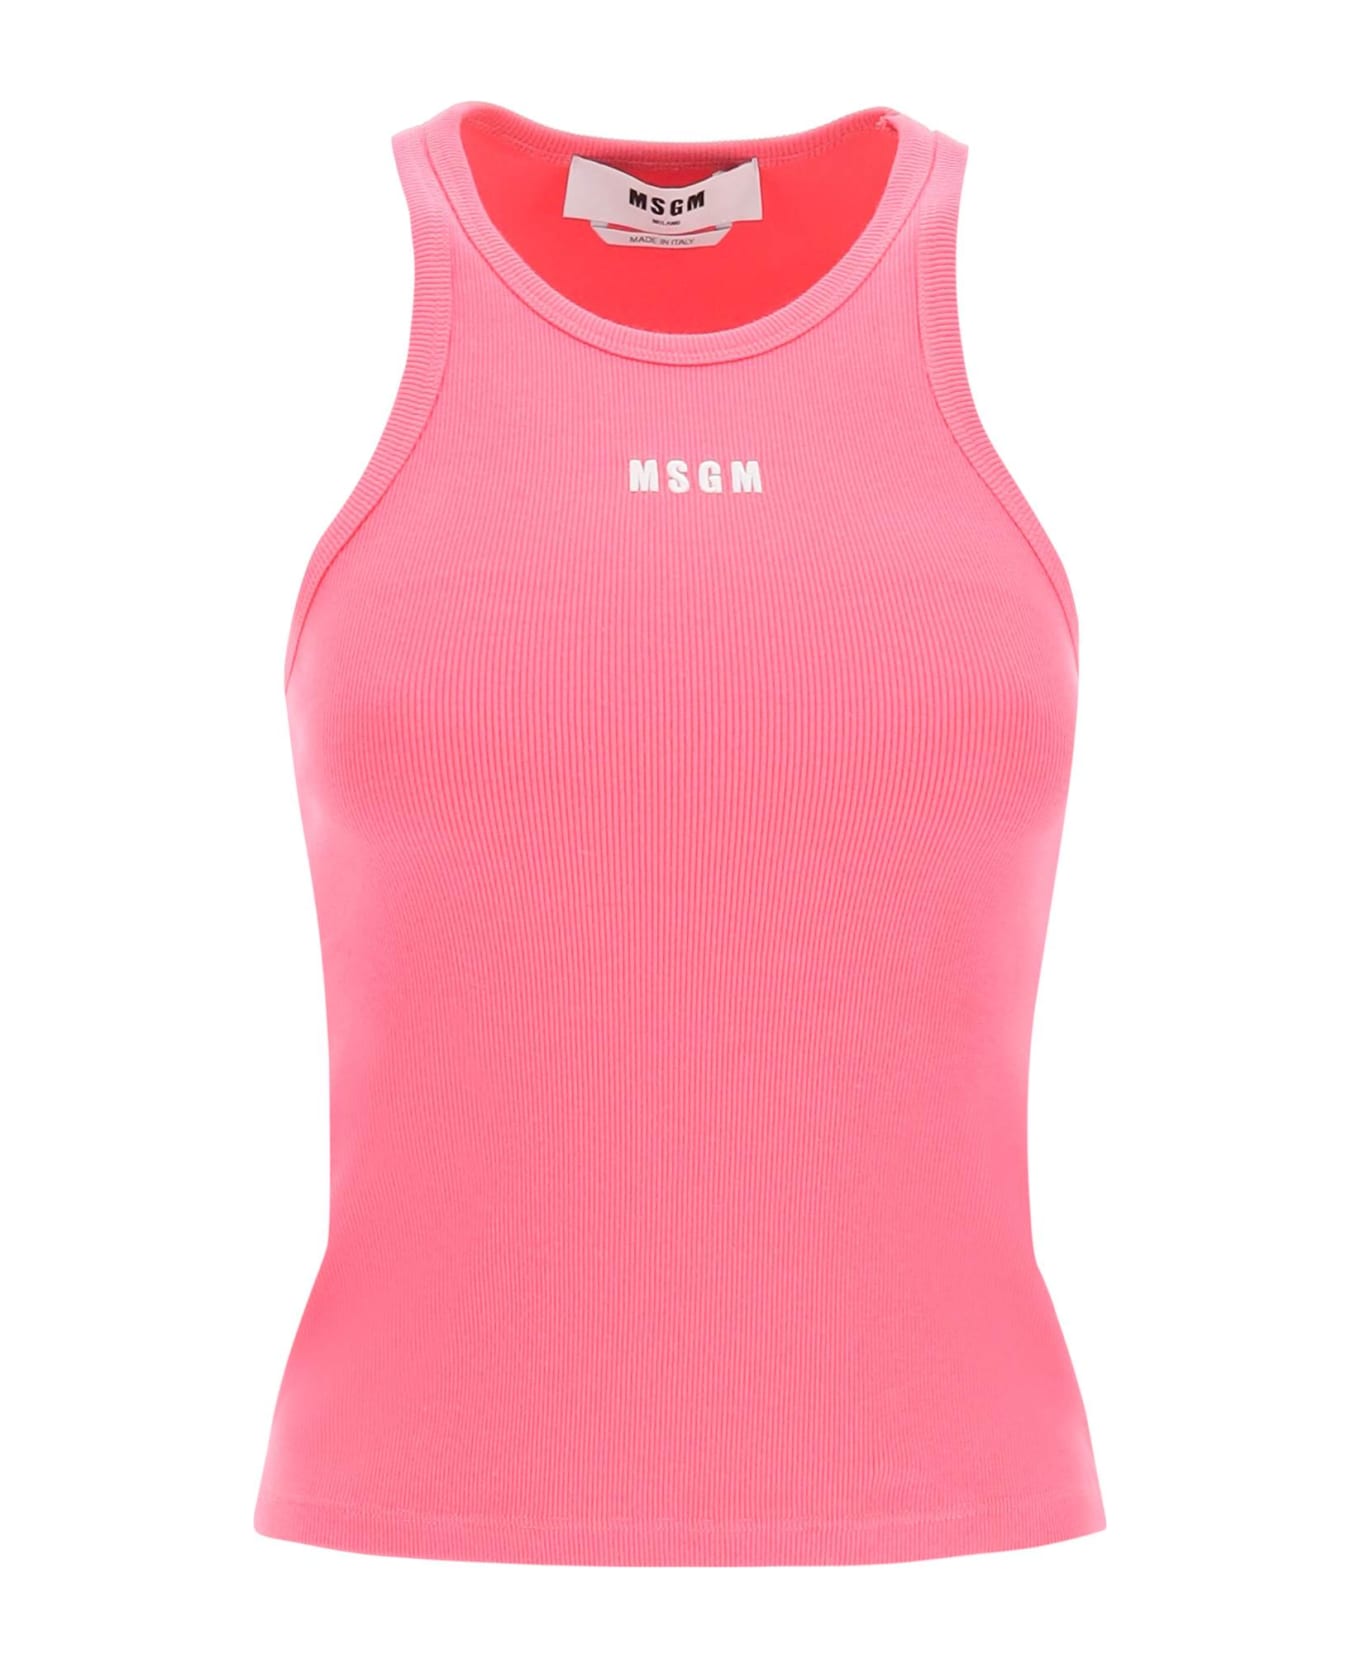 MSGM Logo Embroidery Tank Top - HOT PINK (Pink)